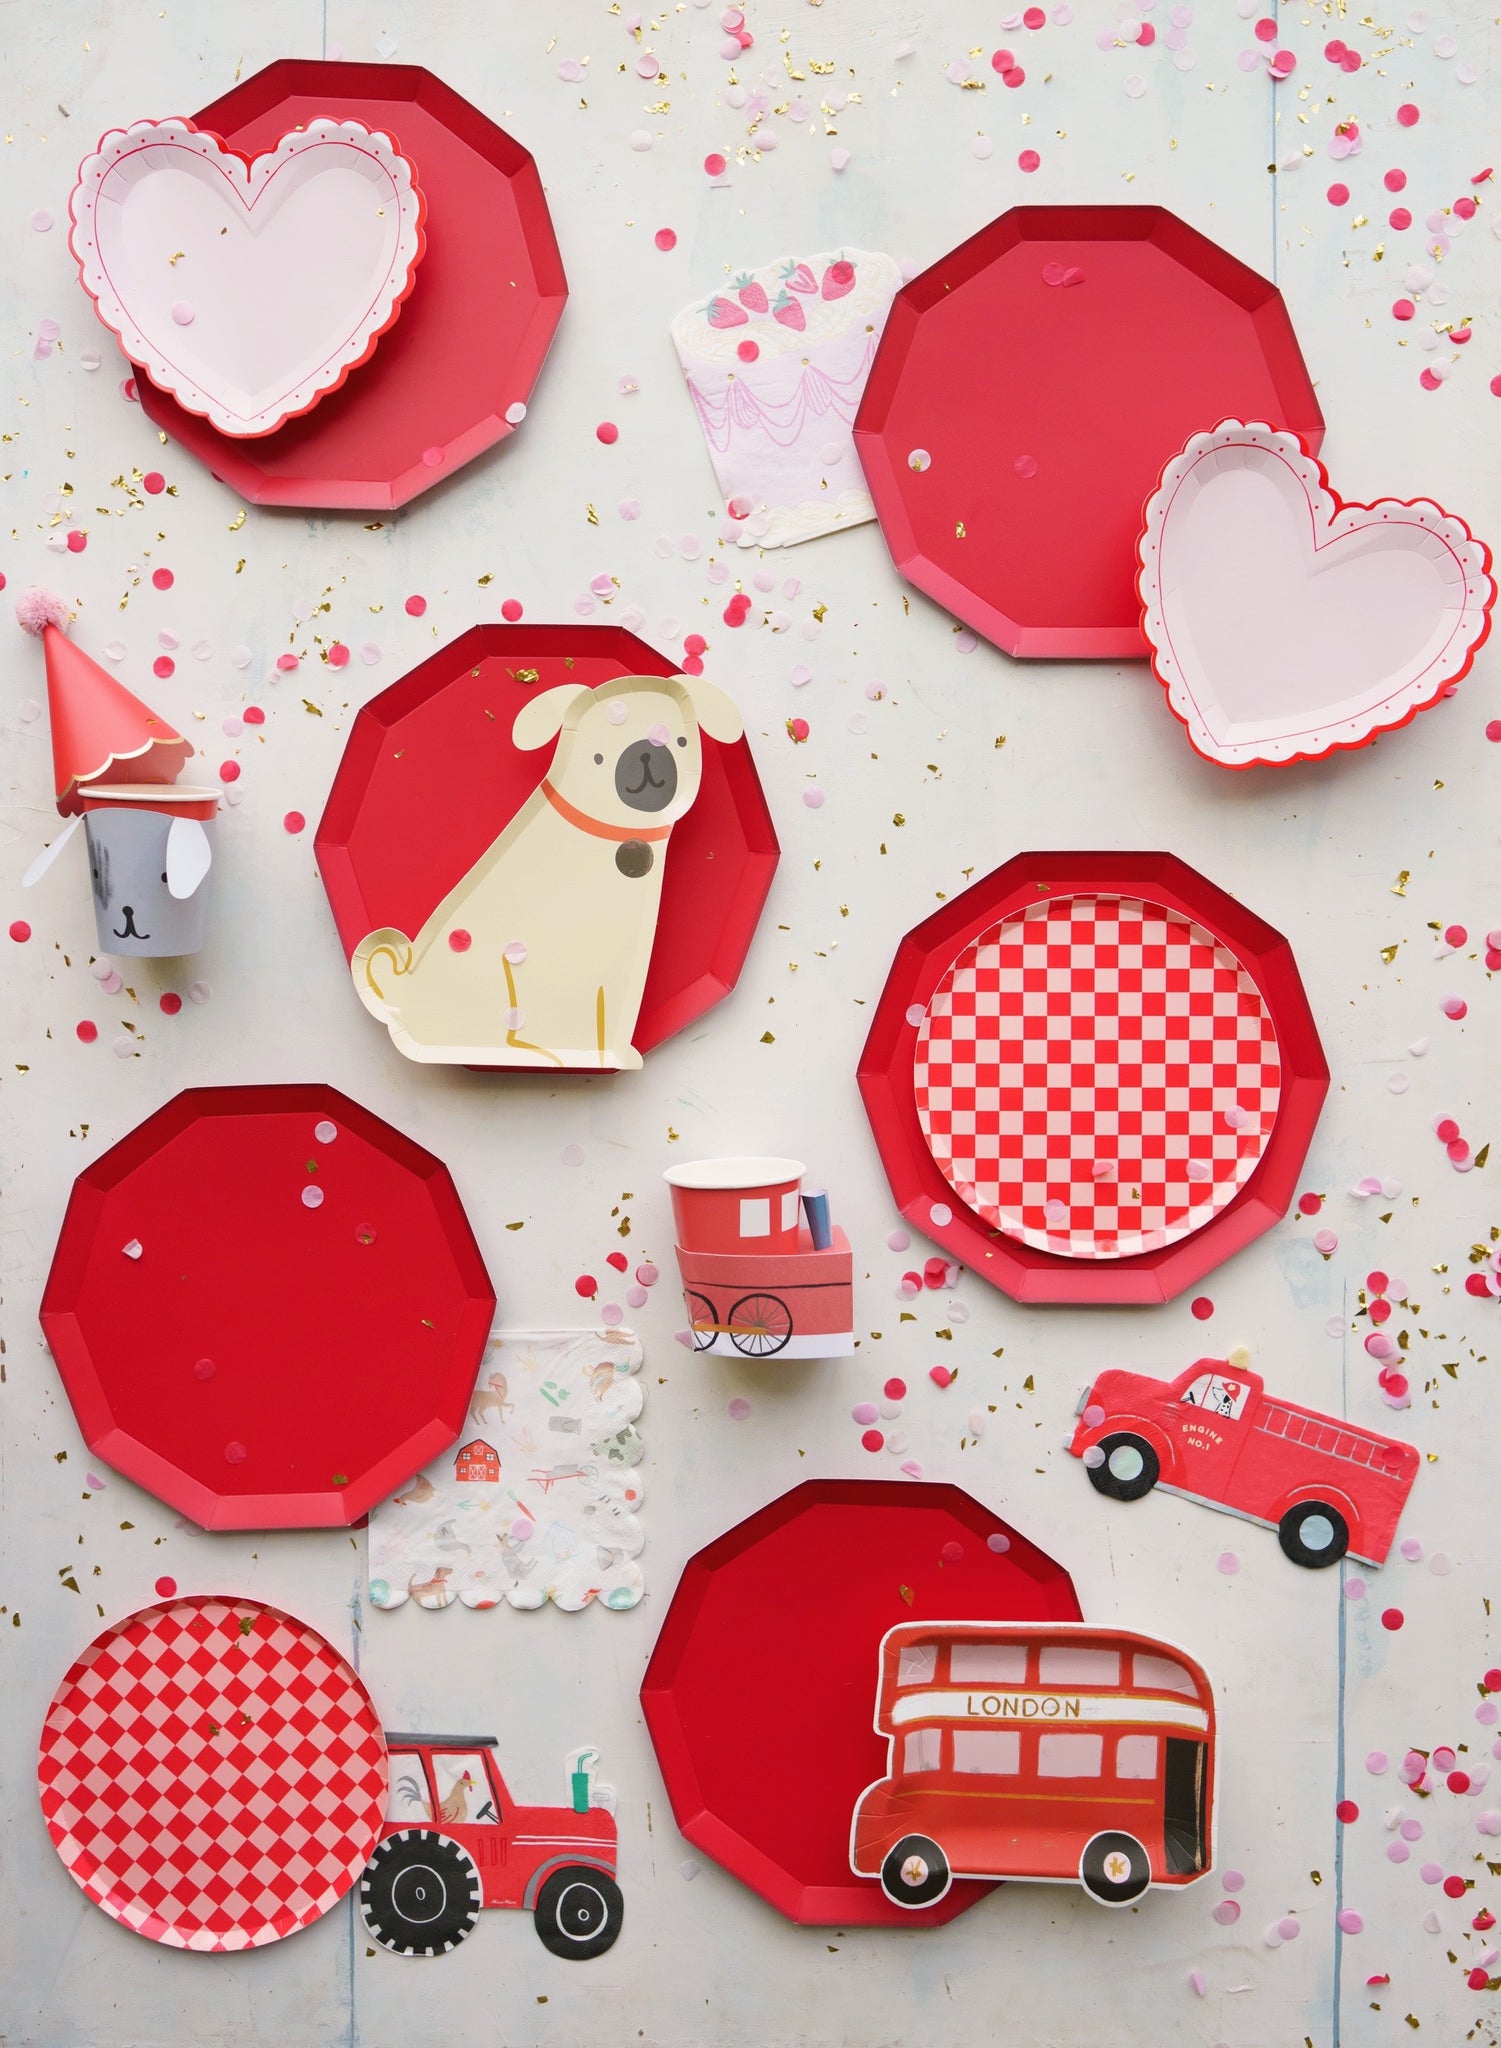 Cherry red premium paper plates to use for a boy birthday party, gender neutral birthday party, Valentine's Day, or any occasion.